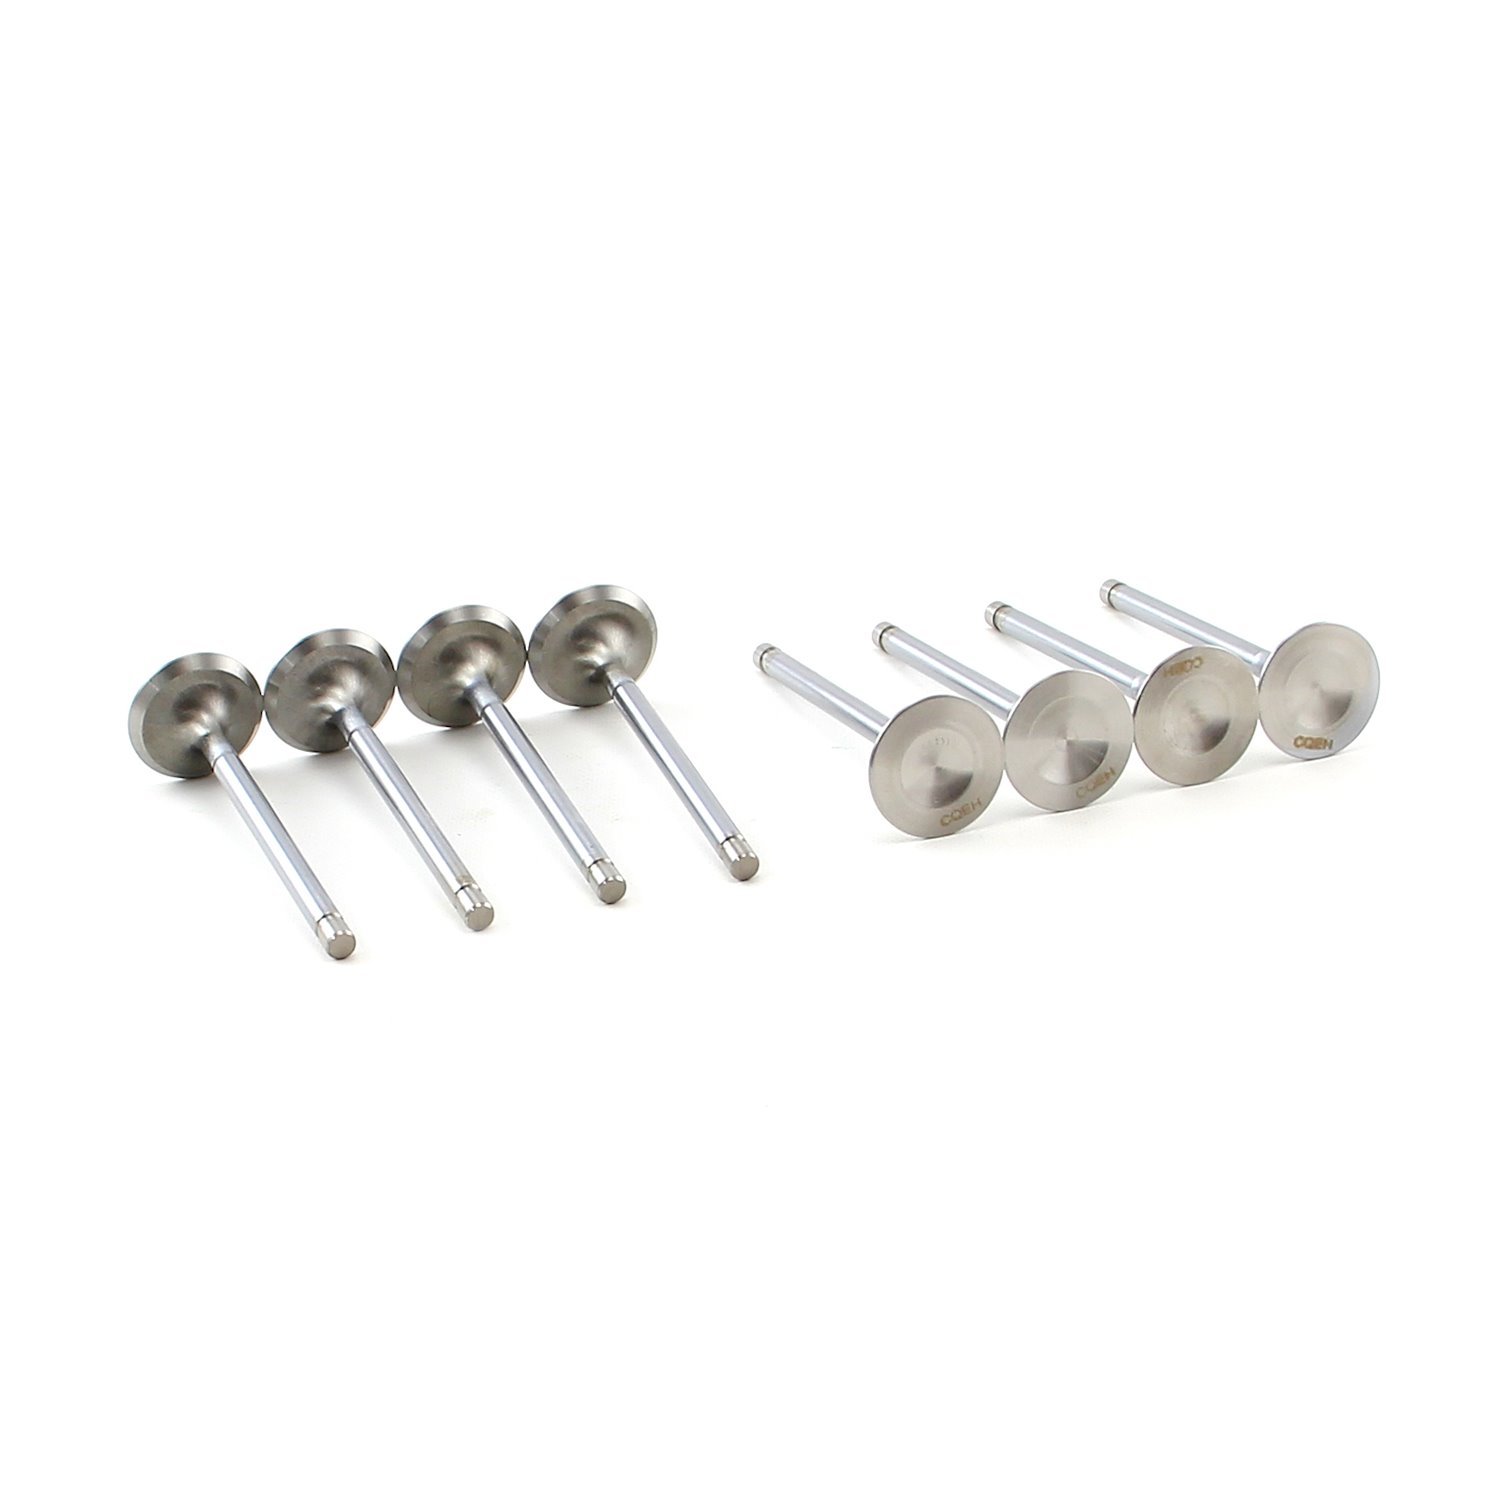 Ford 302 351C Cleveland 460 1710 +STD 11/32 Stainless Steel Exhaust Valves Set